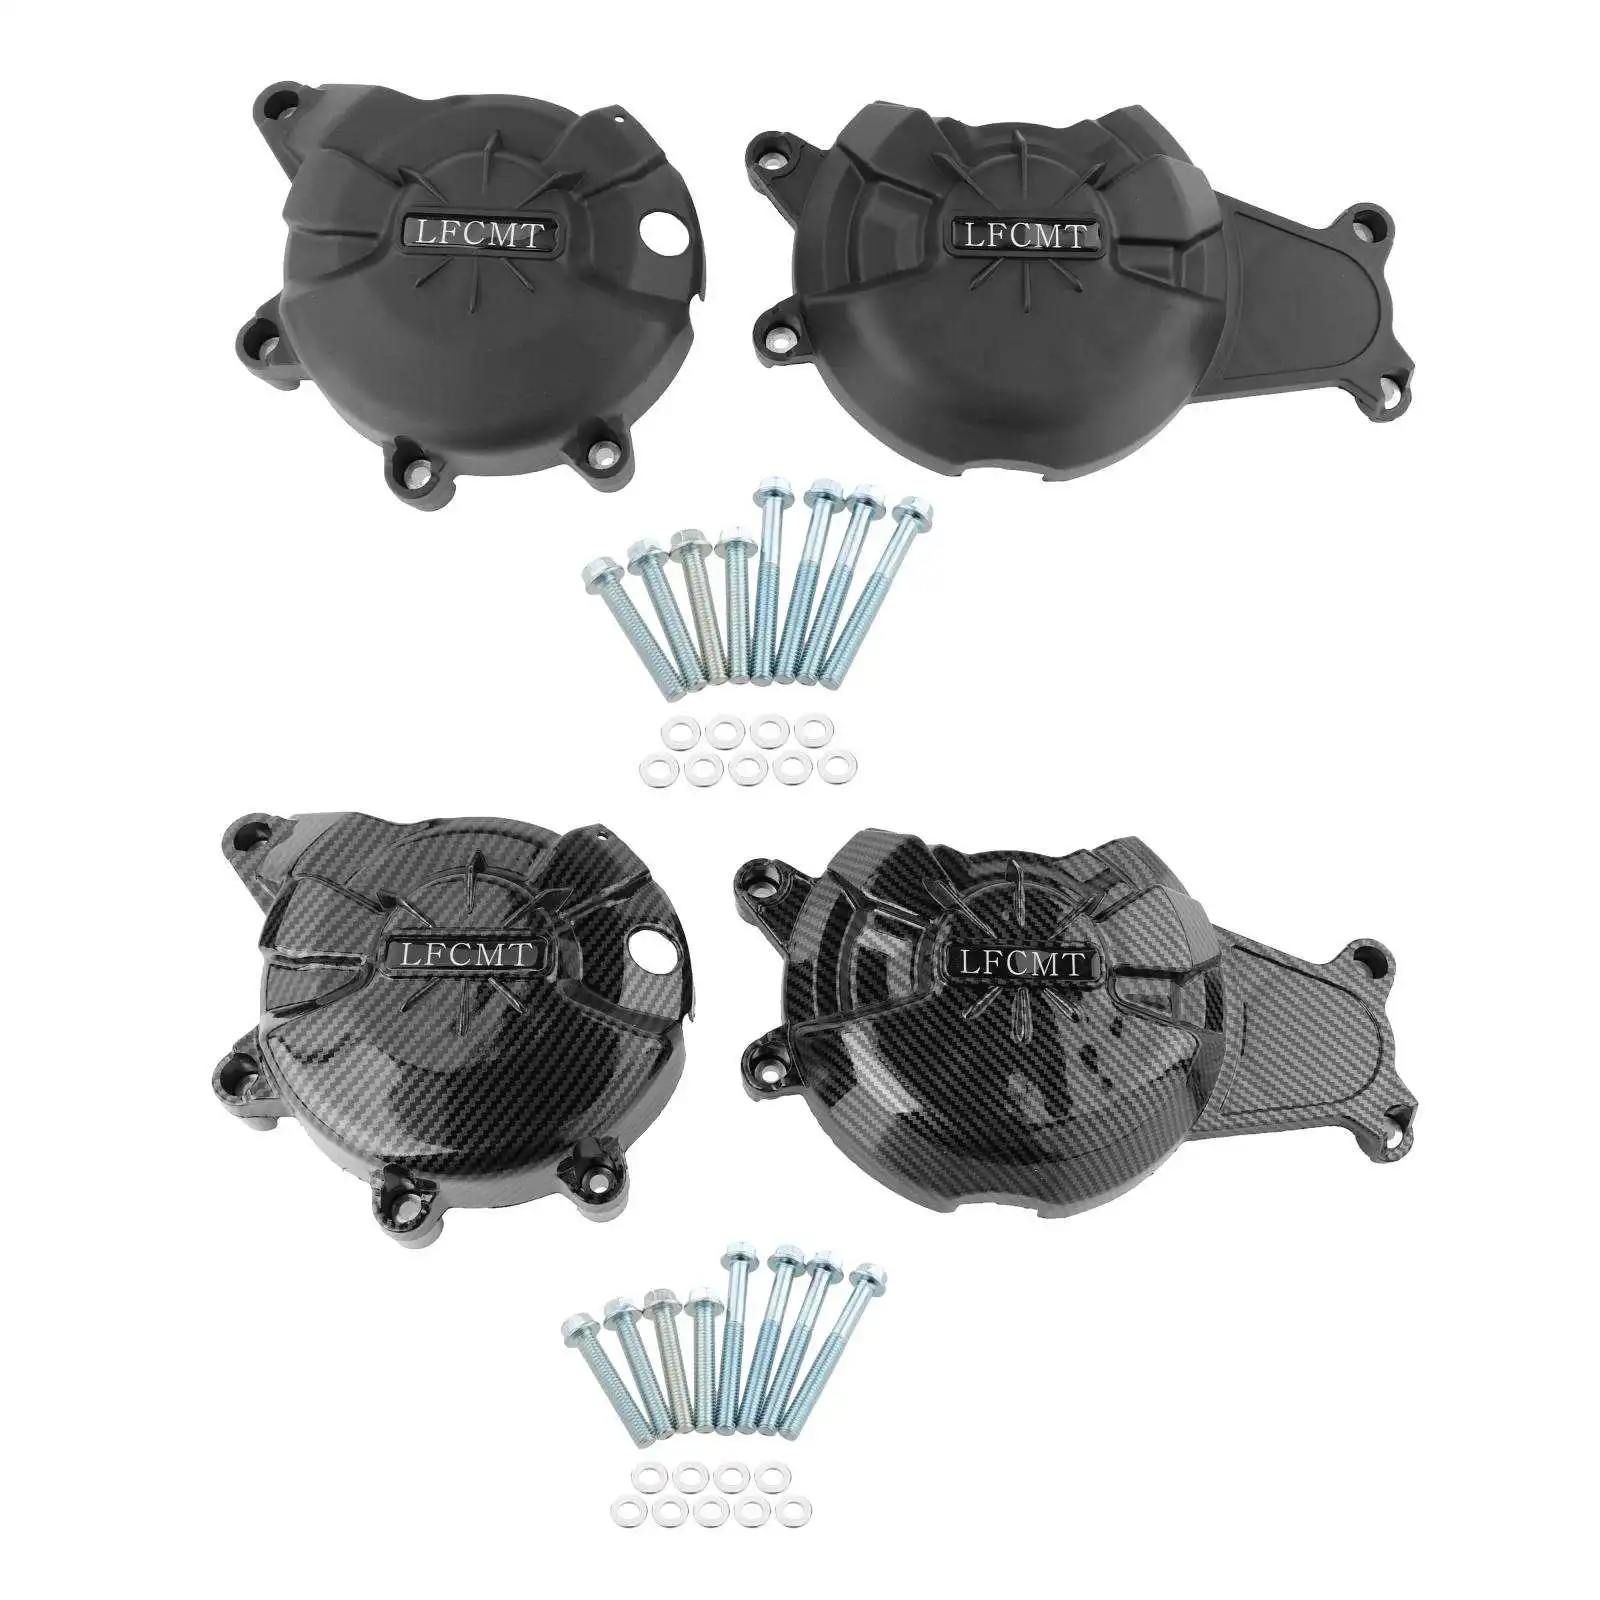 Racing Engine Case Cover Kit Protective Motorcycles Protectors Guards Engine Bonnet Fits for Yamaha Mt-07 Fz-07 MT07 FZ07 14-21